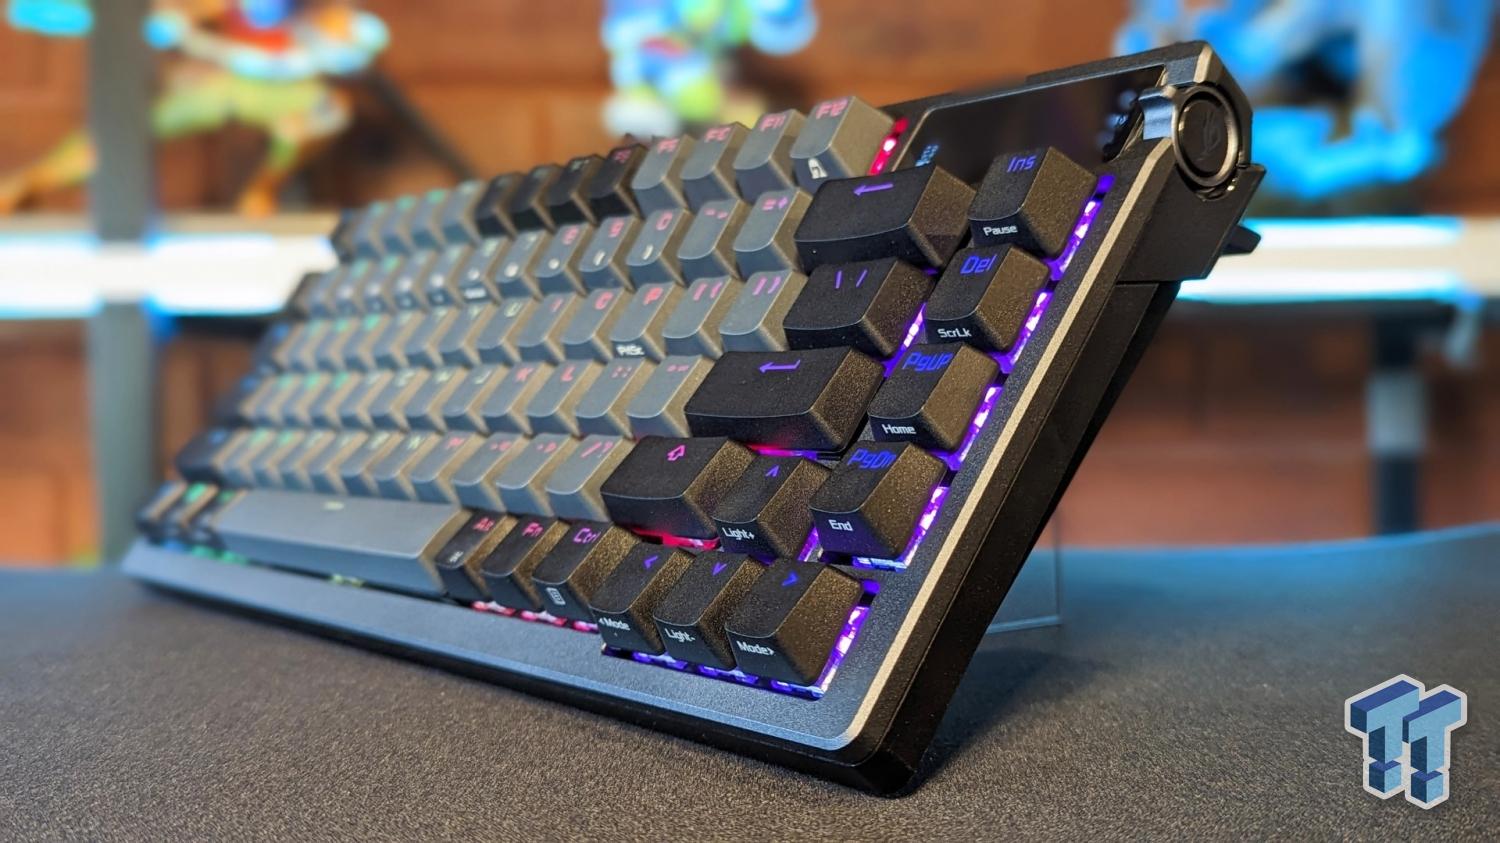 Tech Review: The Asus ROG Azoth gaming keyboard feels as good as it looks -  The AU Review